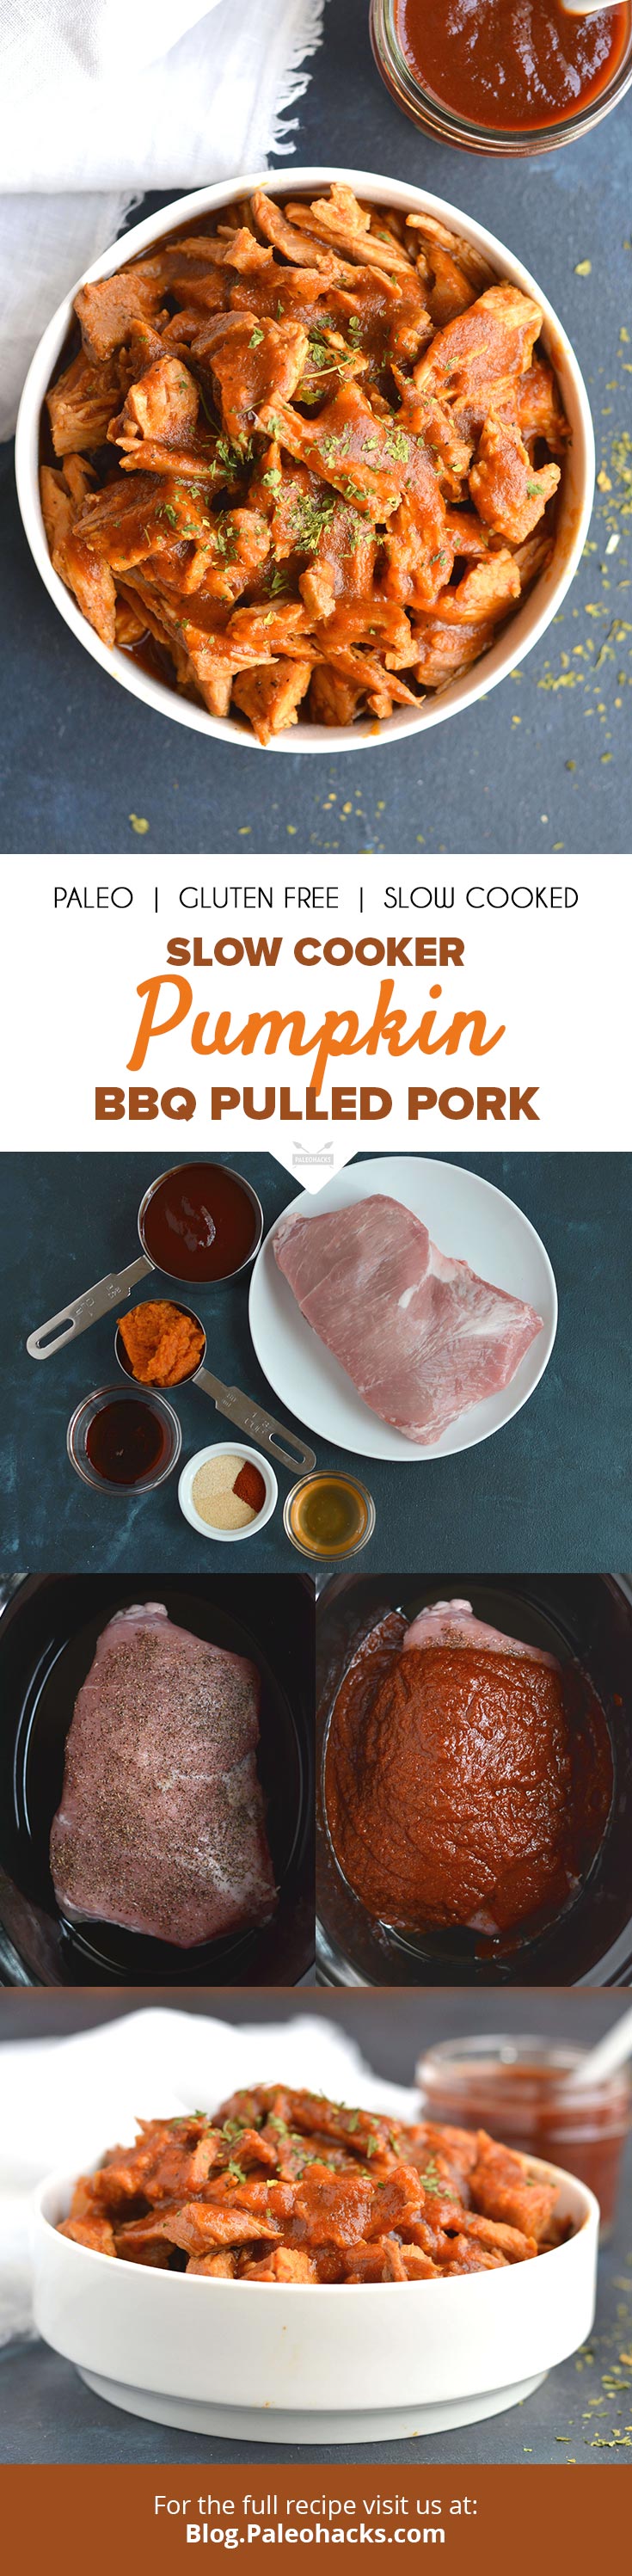 The secret to this juicy slow cooked pulled pork? Pumpkin purée! Use your slow cooker to get this pulled pork with thick pumpkin BBQ sauce extra succulent. 